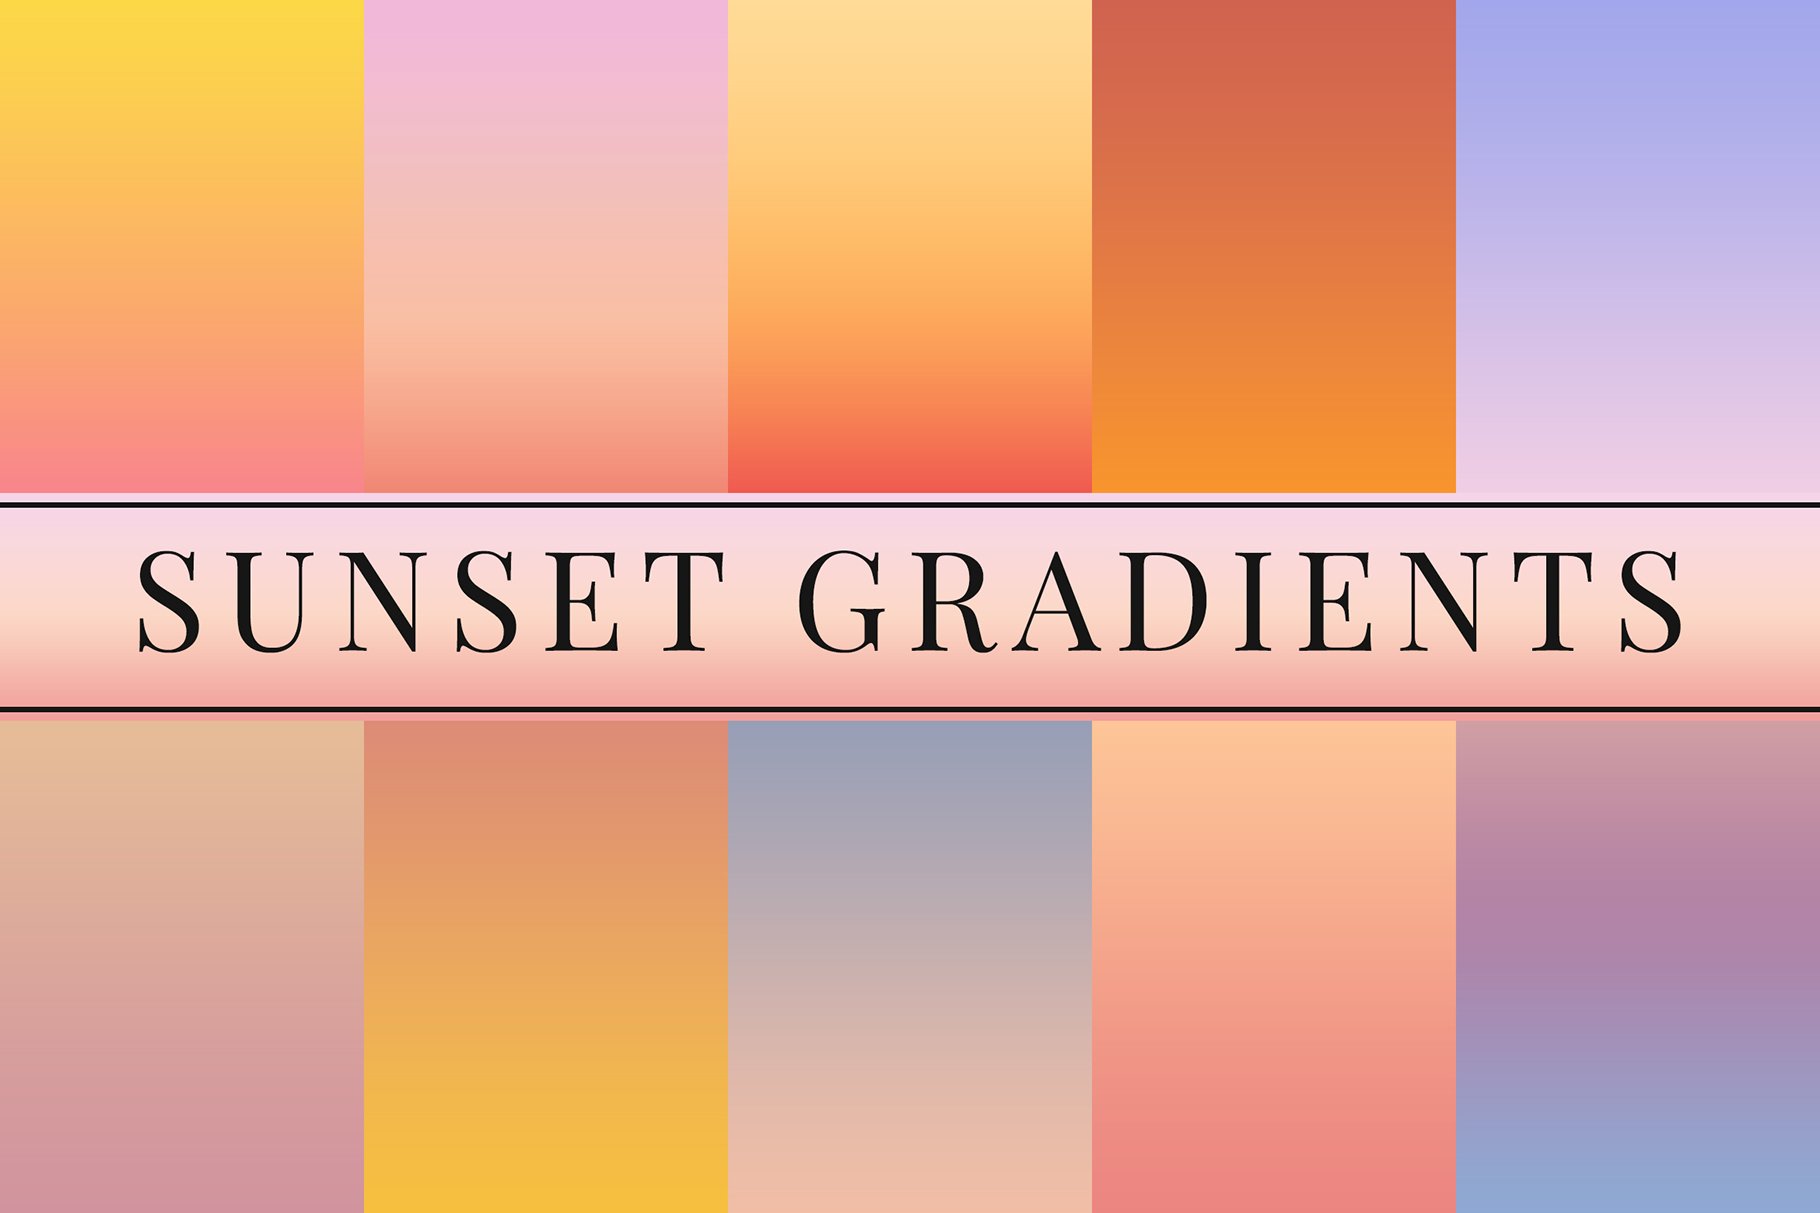 Sunset Gradientscover image.